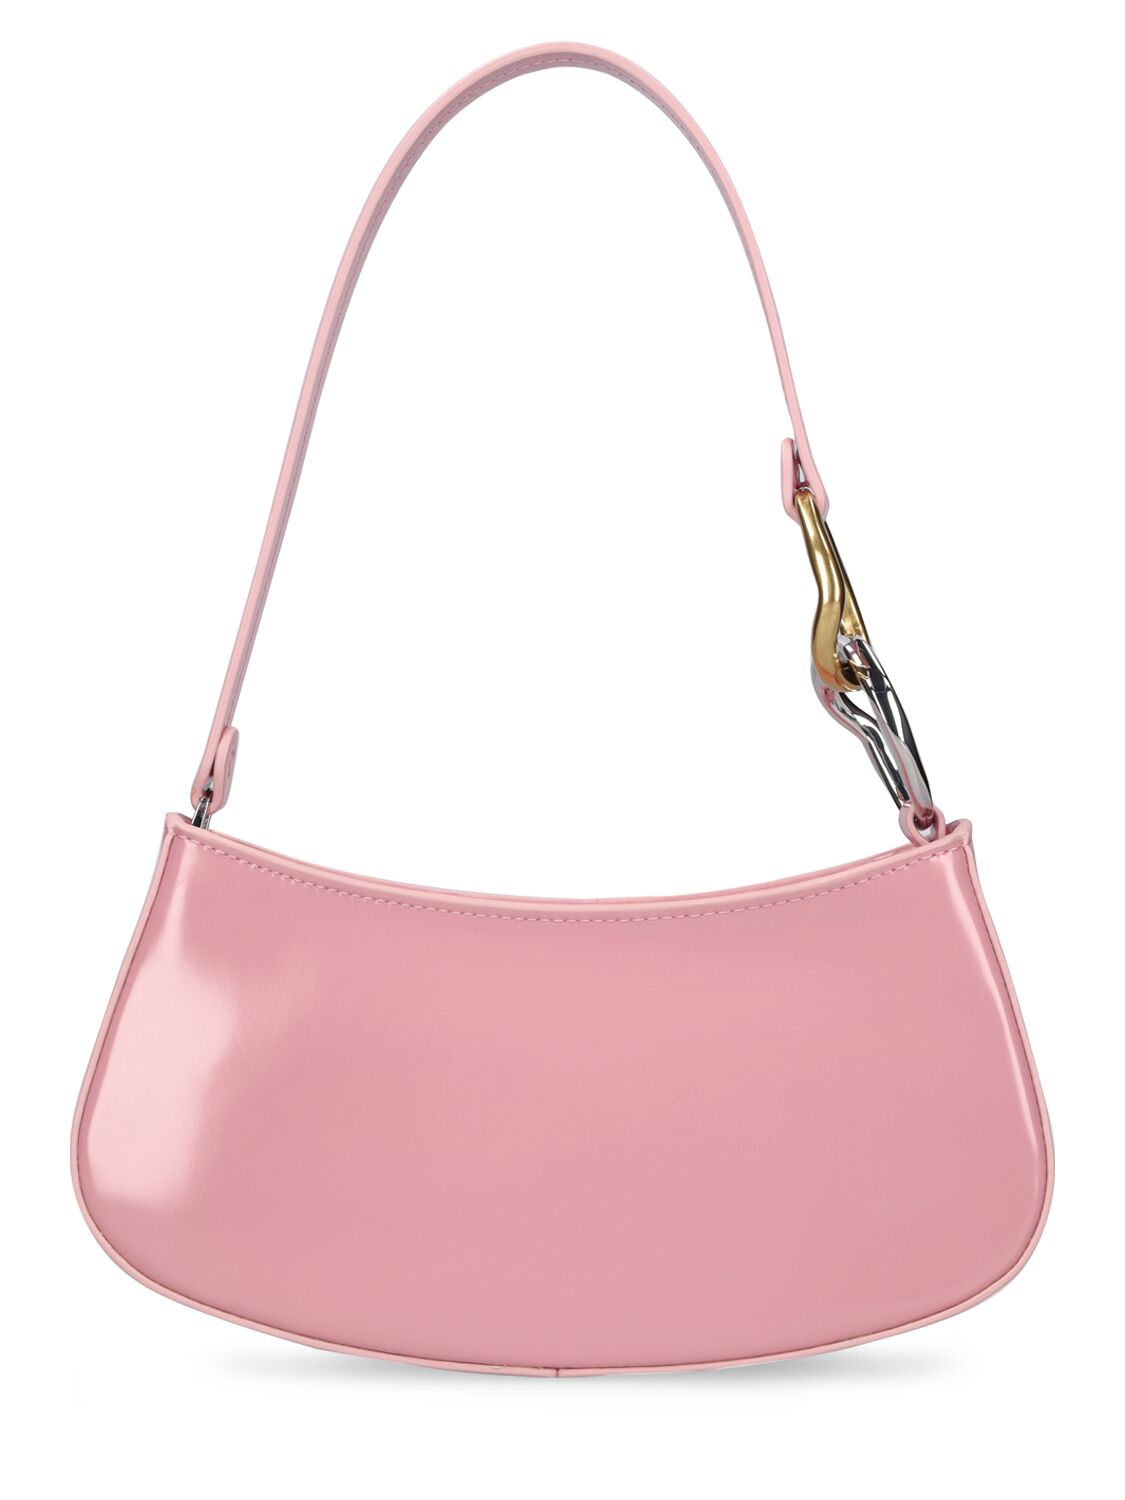 Staud Ollie Patent Leather Shoulder Bag In Cherry Blossom